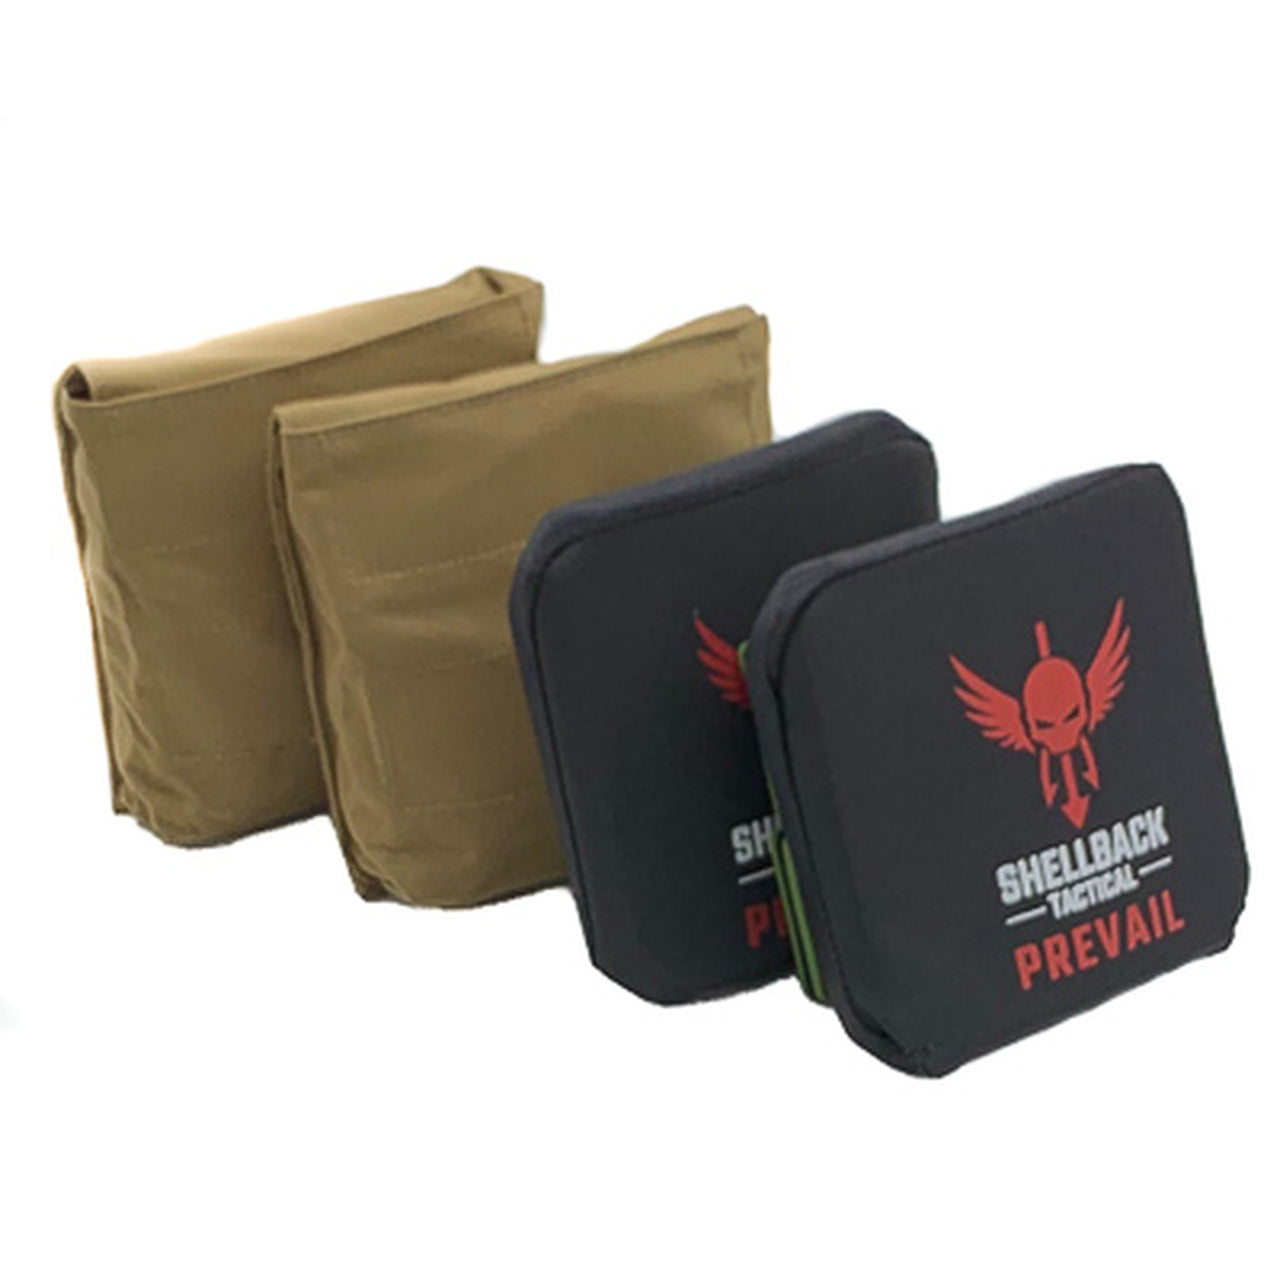 Three pouches with the brand name 'Shellback Tactical Side Armor Plate Kit with Level IV Model 4S17 Armor Plates' on them.